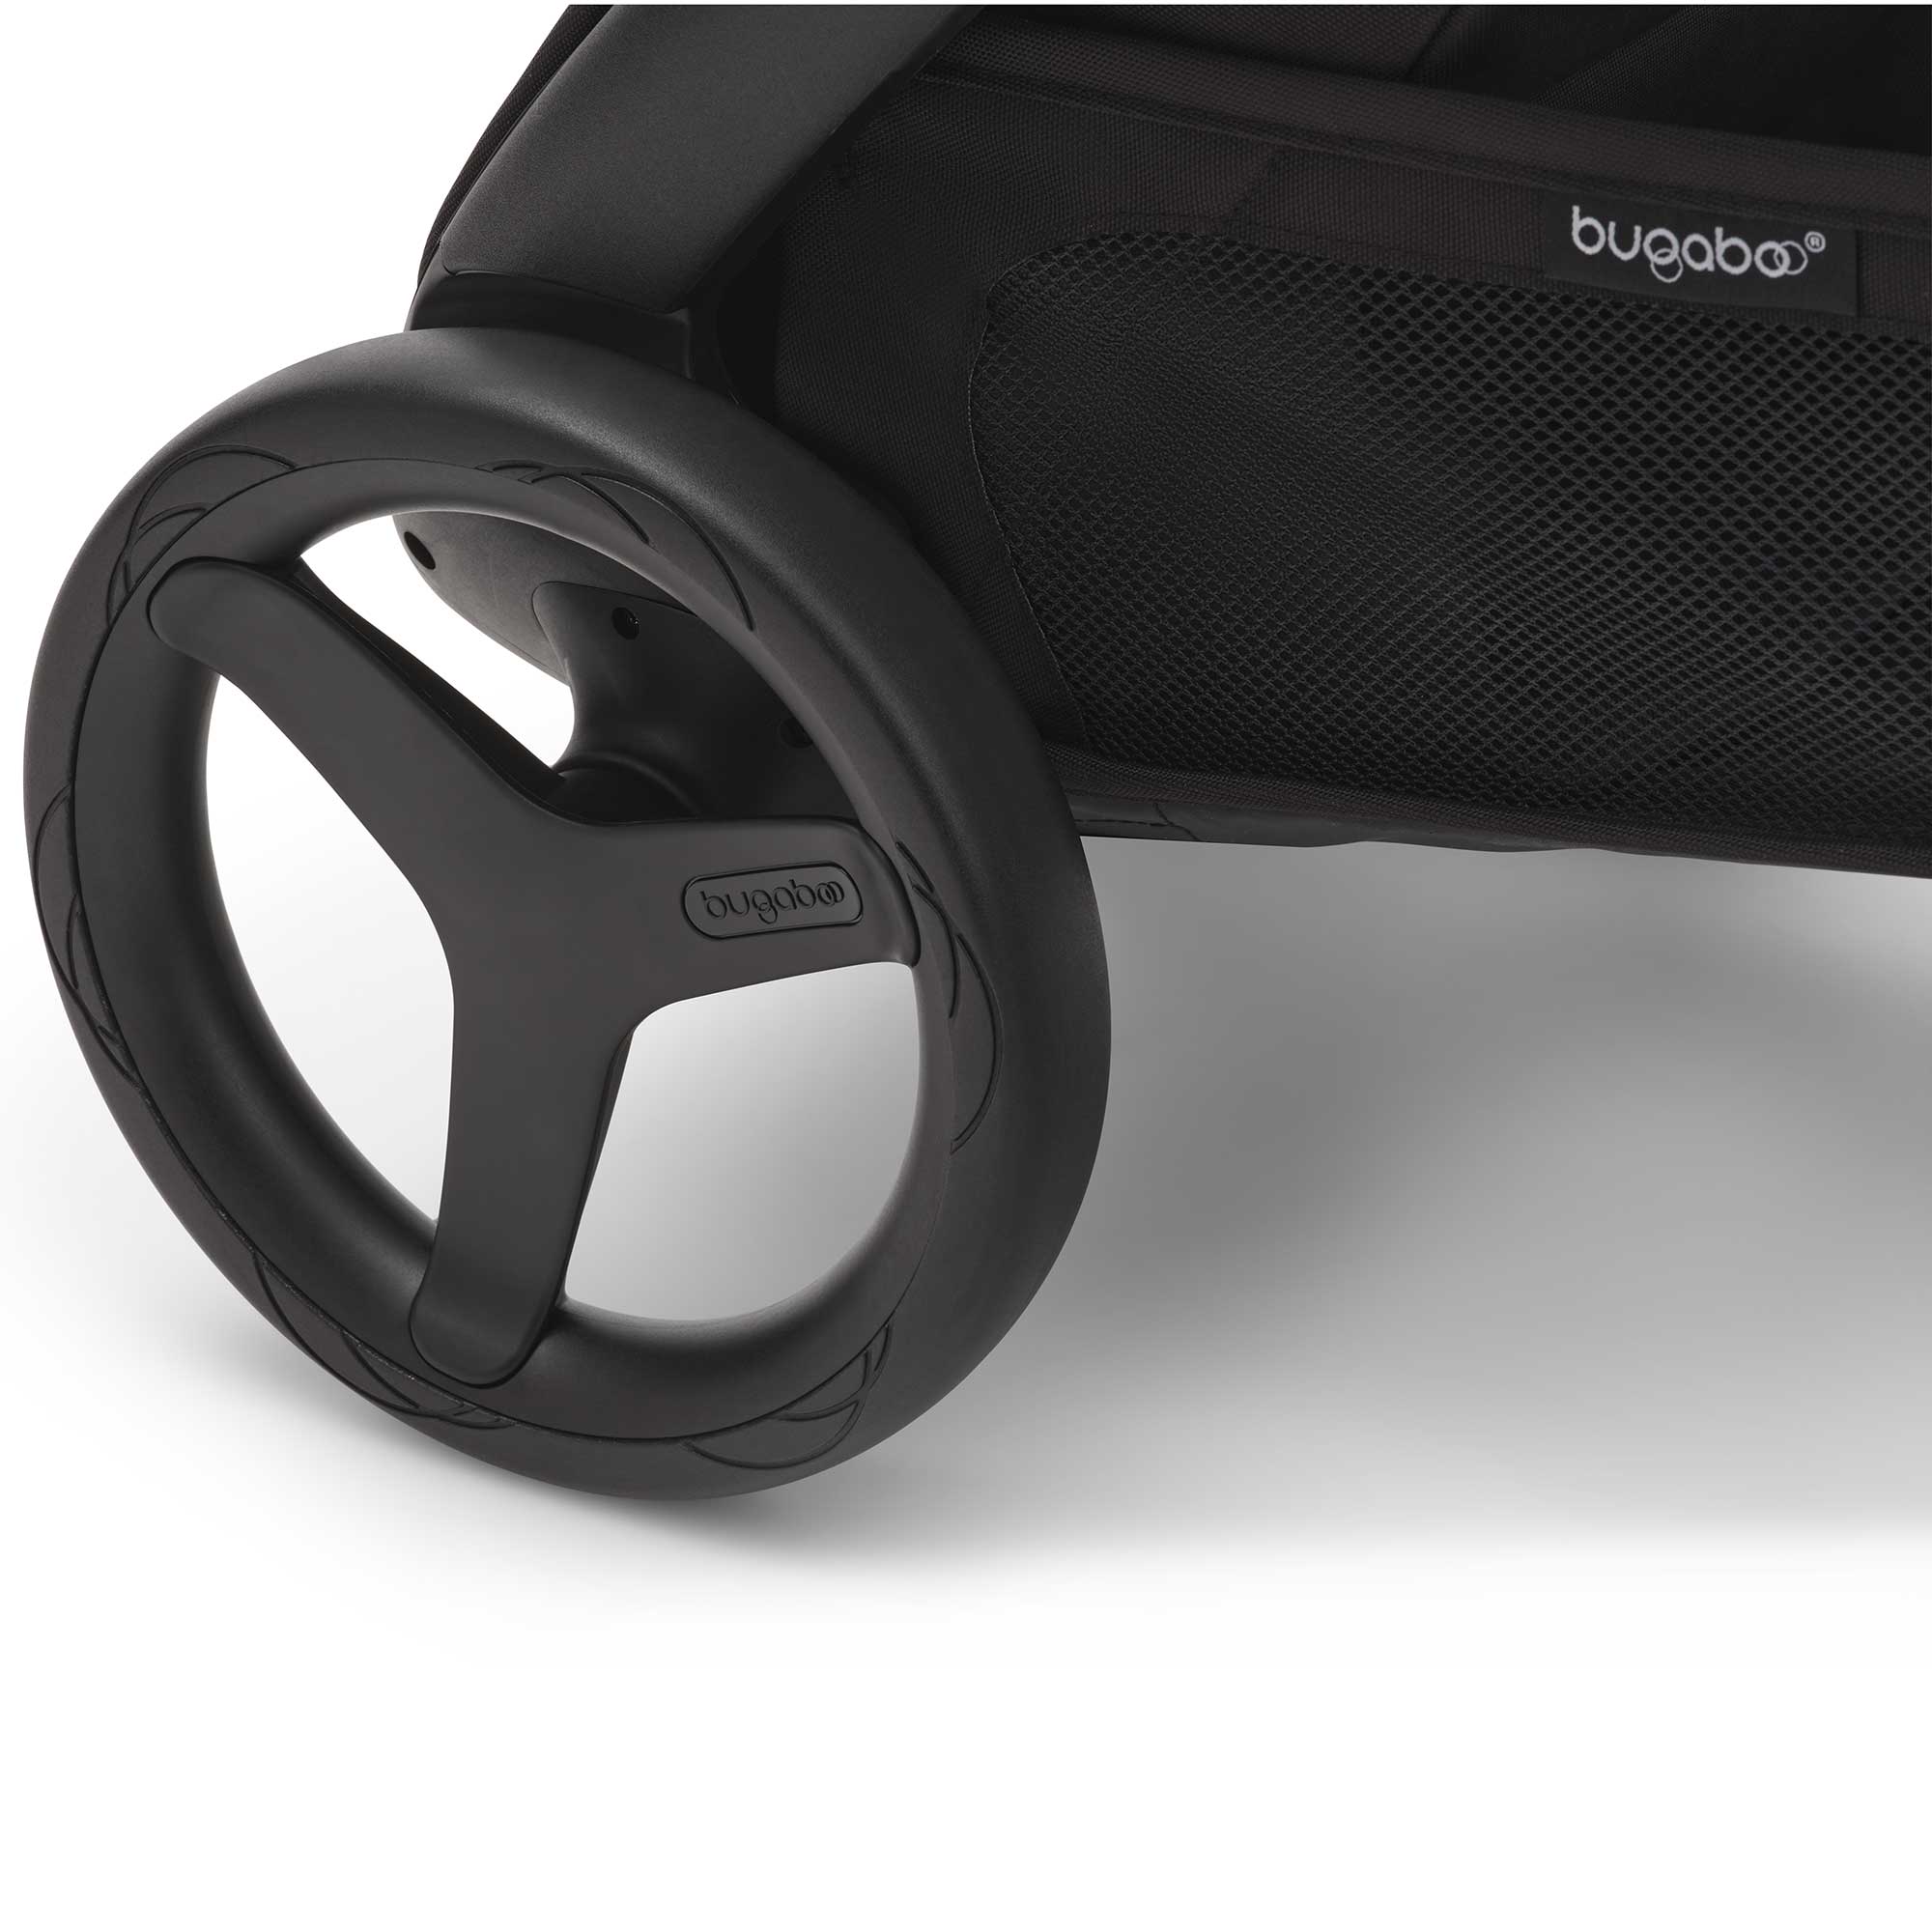 Bugaboo Dragonfly Pebble 360 Pro Travel System - Black/Midnight Black Travel Systems 13817-BLK-MID-BLK 8717447448044